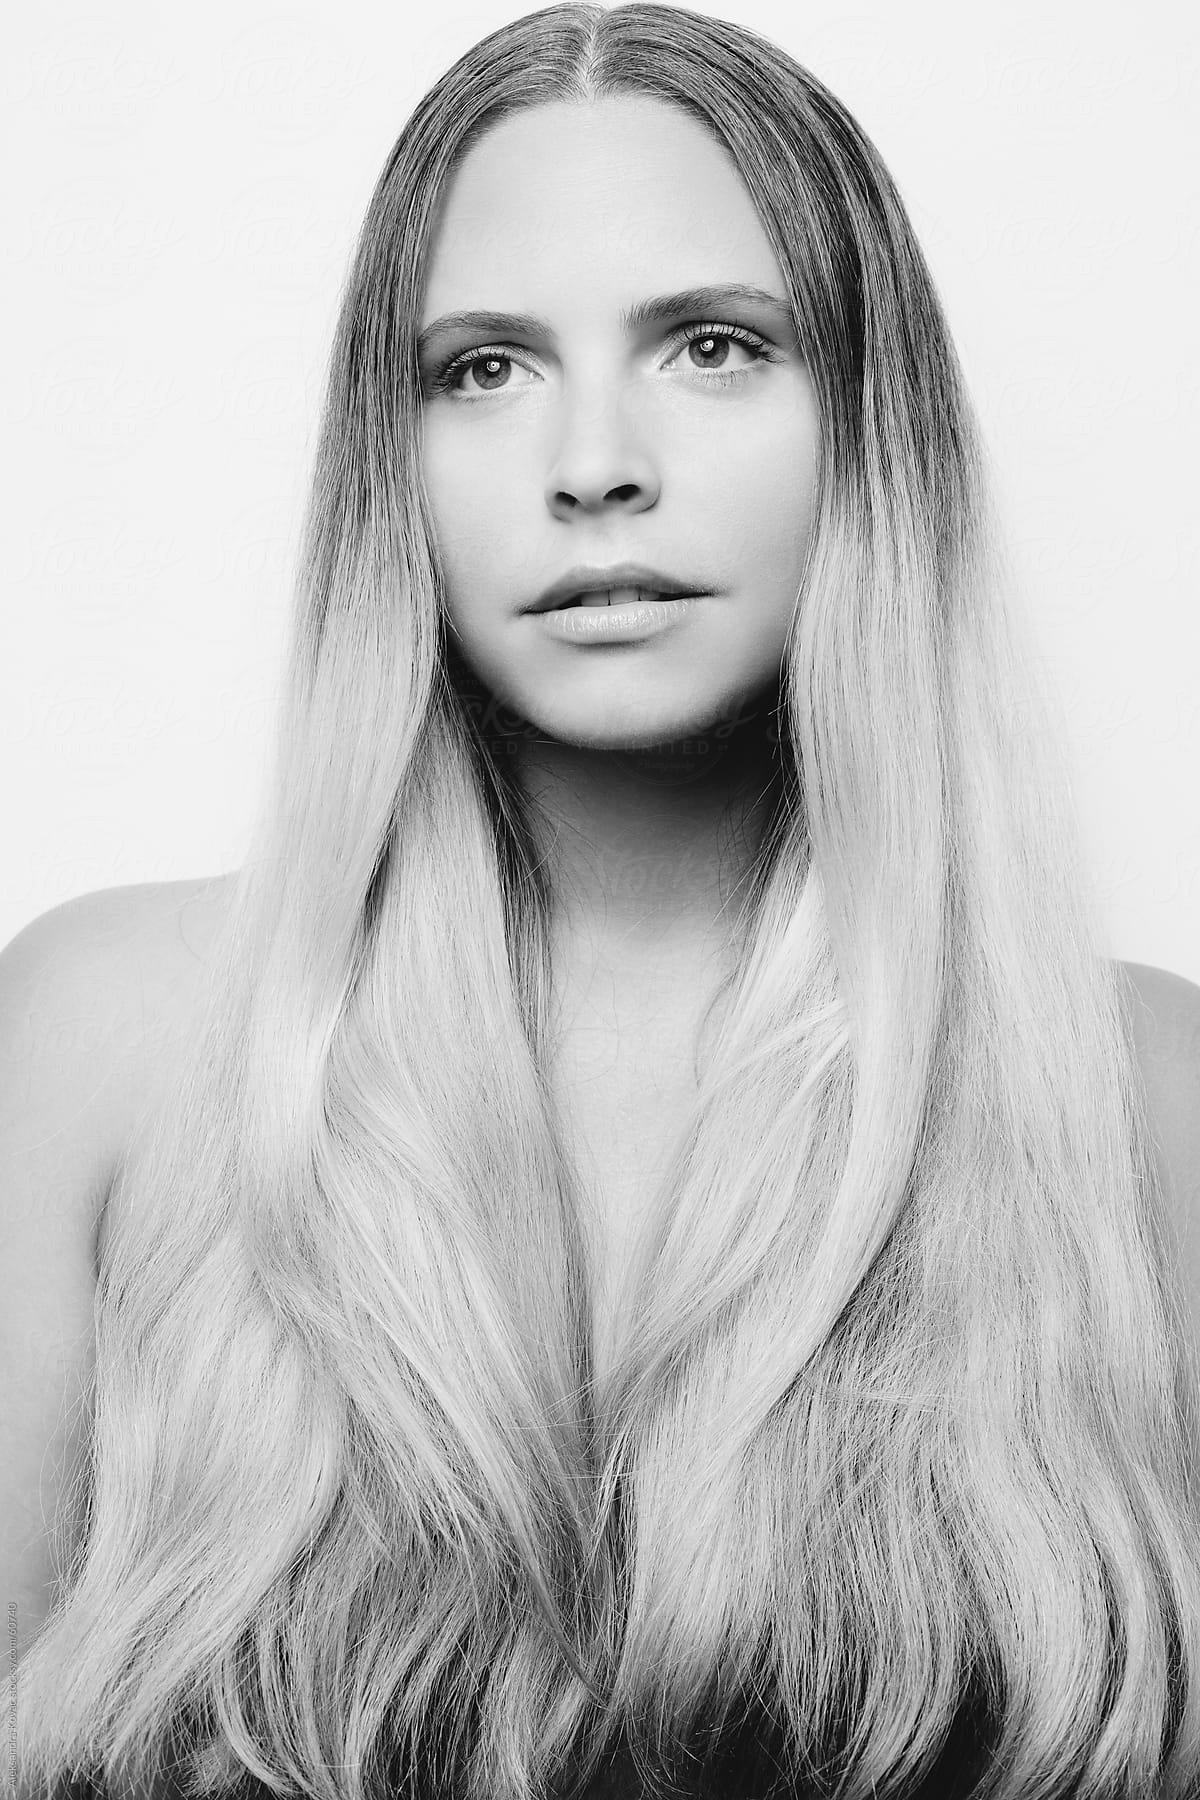 Black and white portrait of woman with long blond hair.